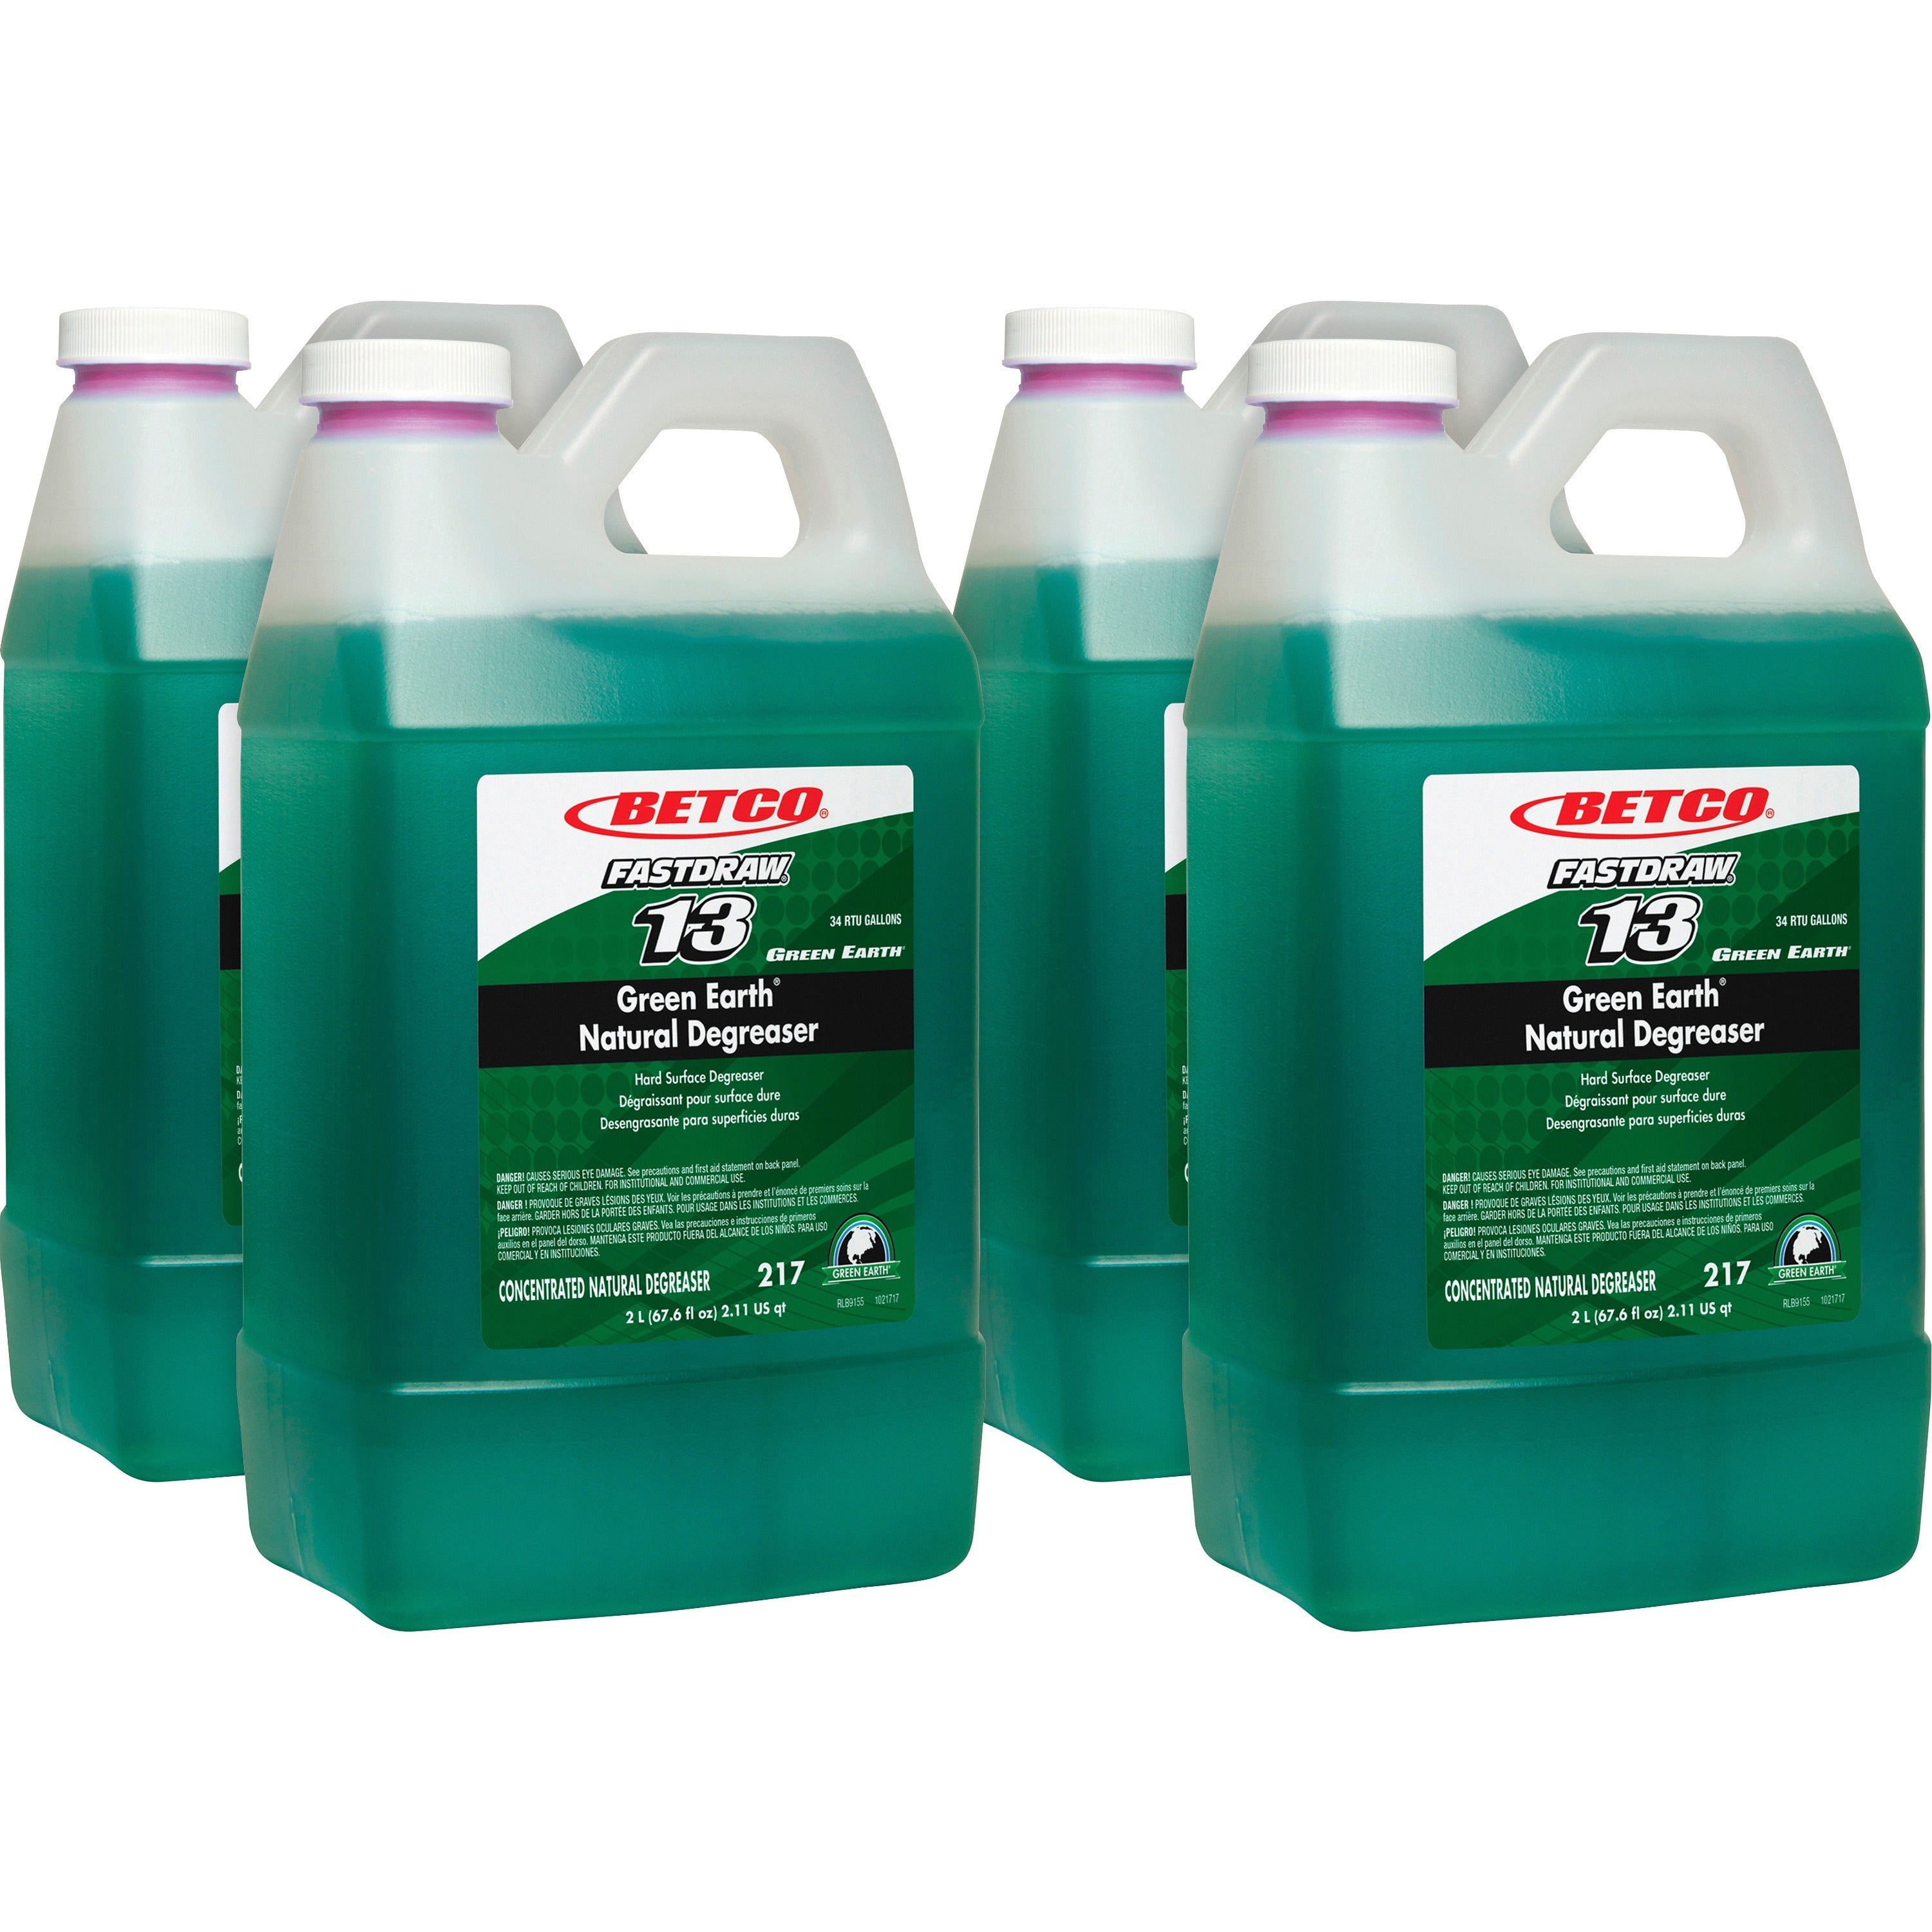 Betco Green Earth Natural Degreaser - FASTDRAW 13 - Concentrate - 67.6 fl oz (2.1 quart) - 4 / Carton - Bio-based, Phosphate-free, Spill Proof - Dark Green - 1